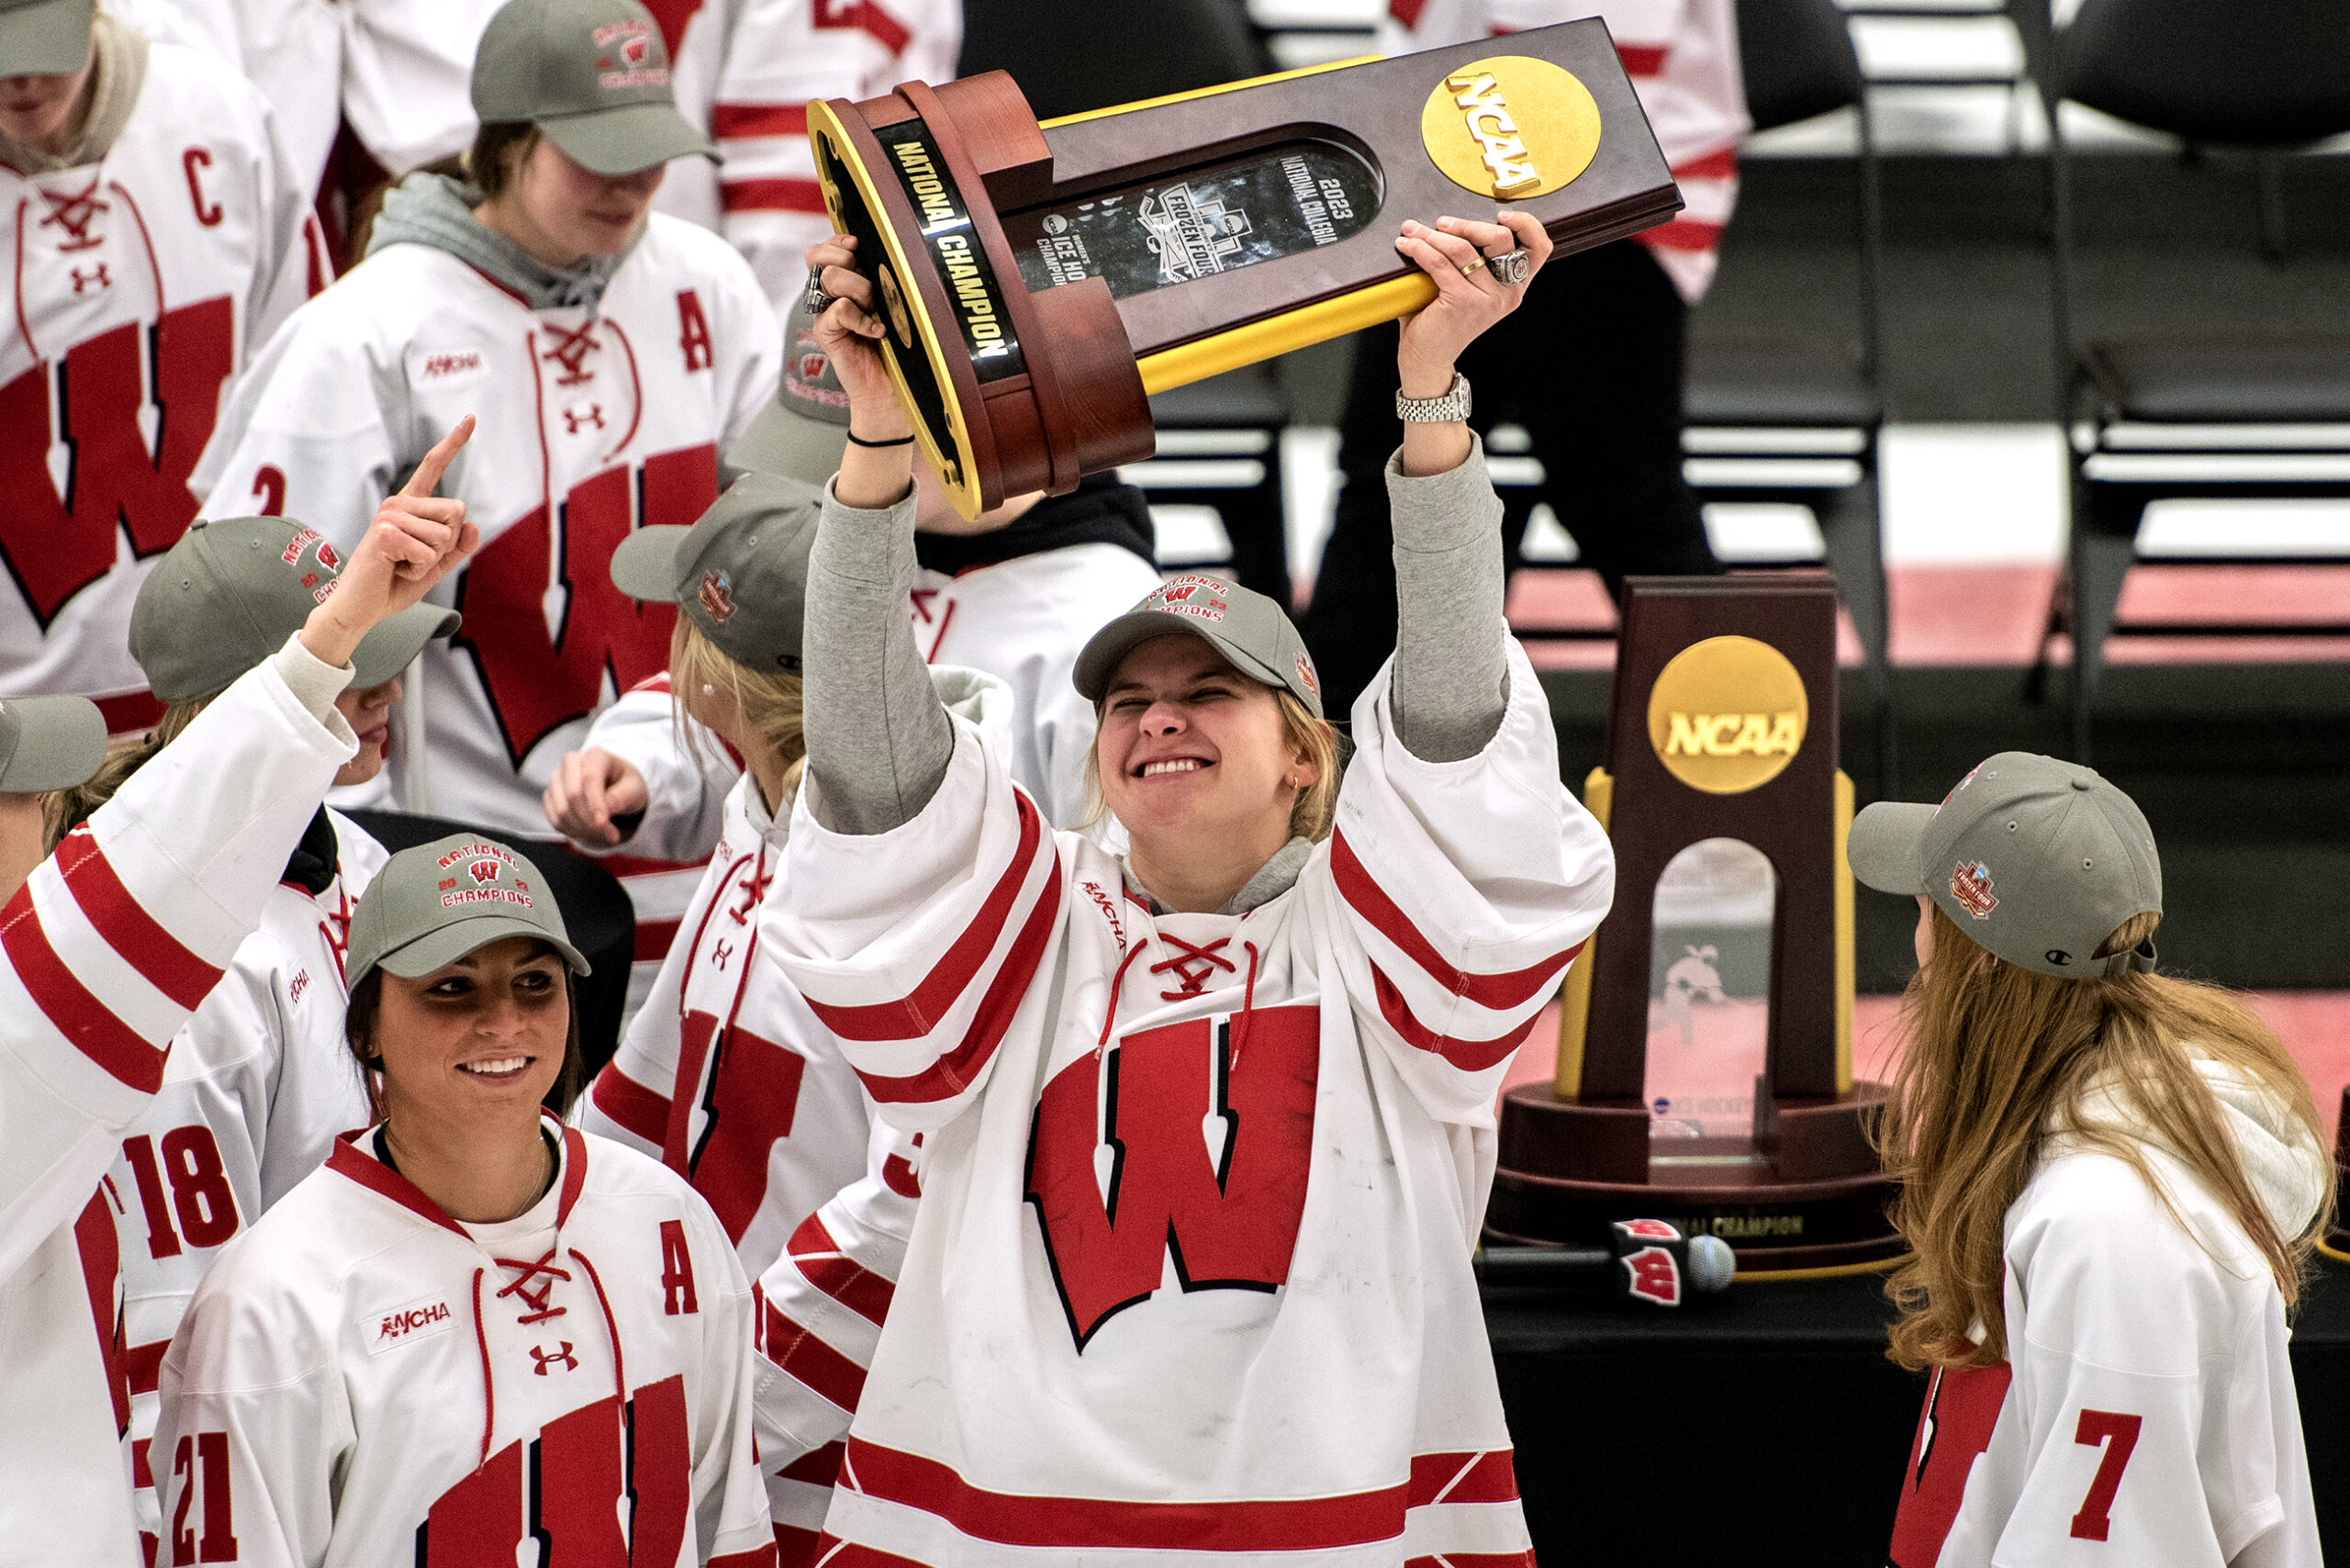 Wisconsin women’s hockey team makes history winning 7th national title, most of all time